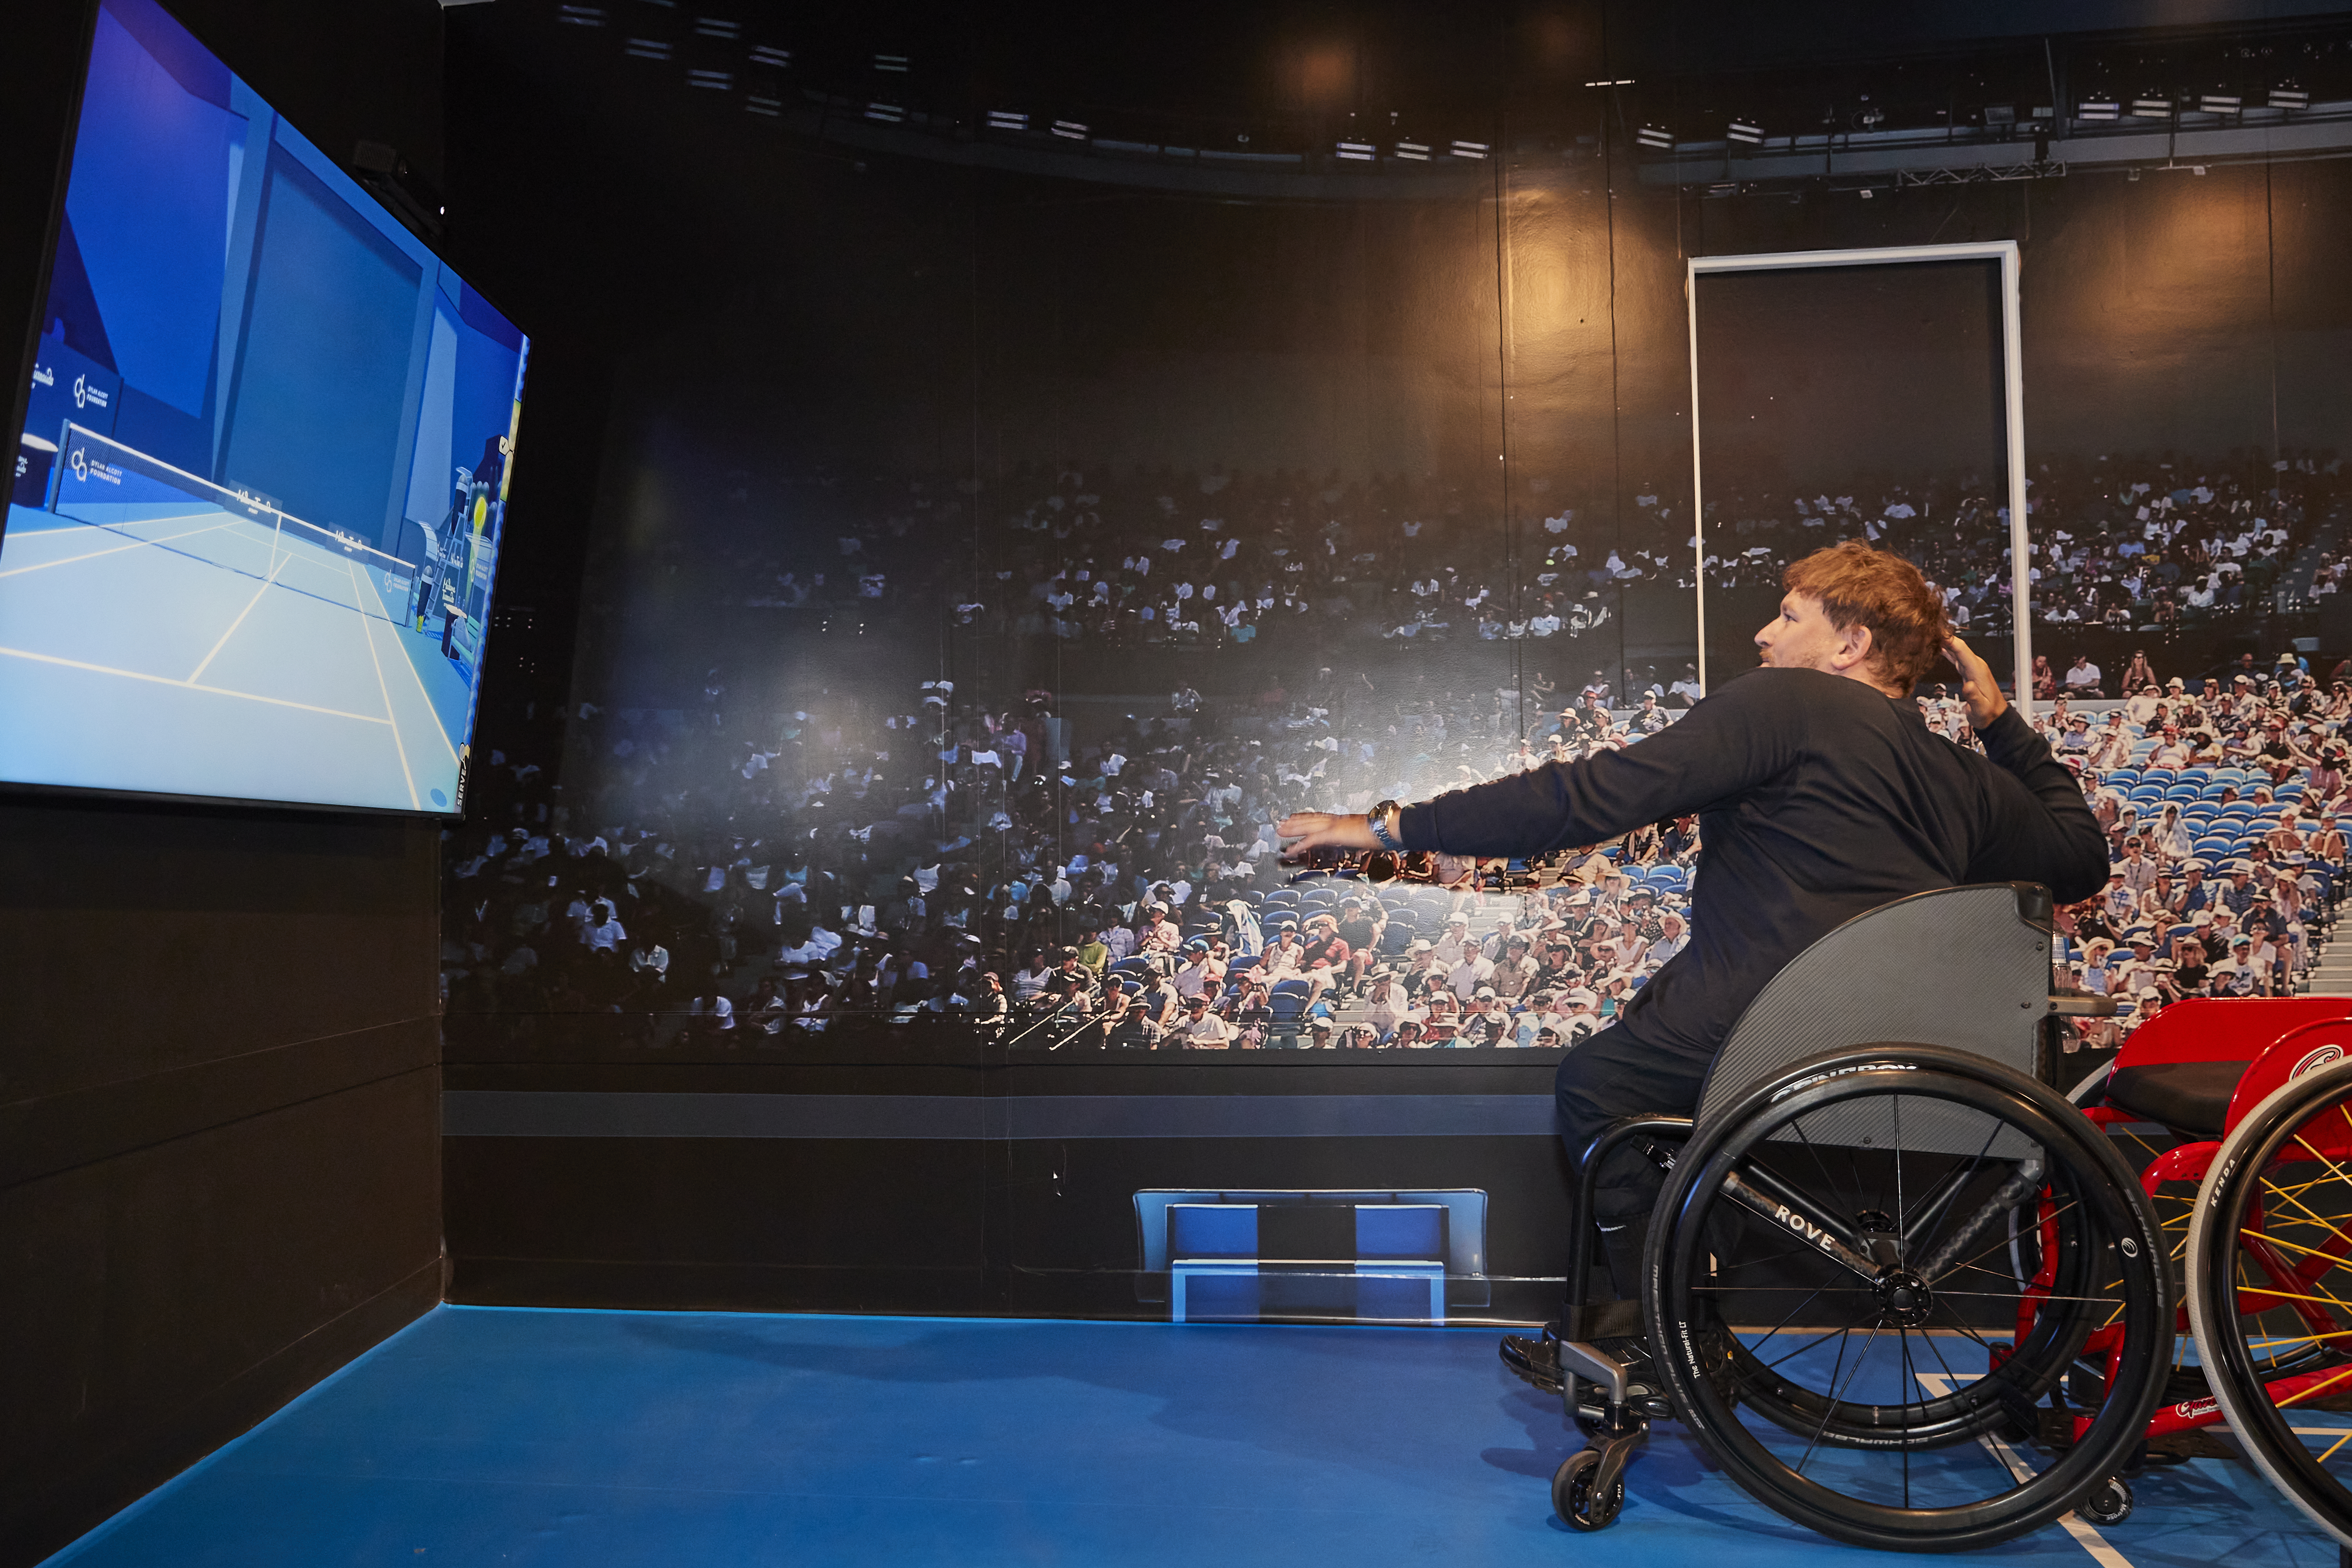 Dylan Alcott (AO) Playing With The 'Serve Like Dylan' Interactive Experience